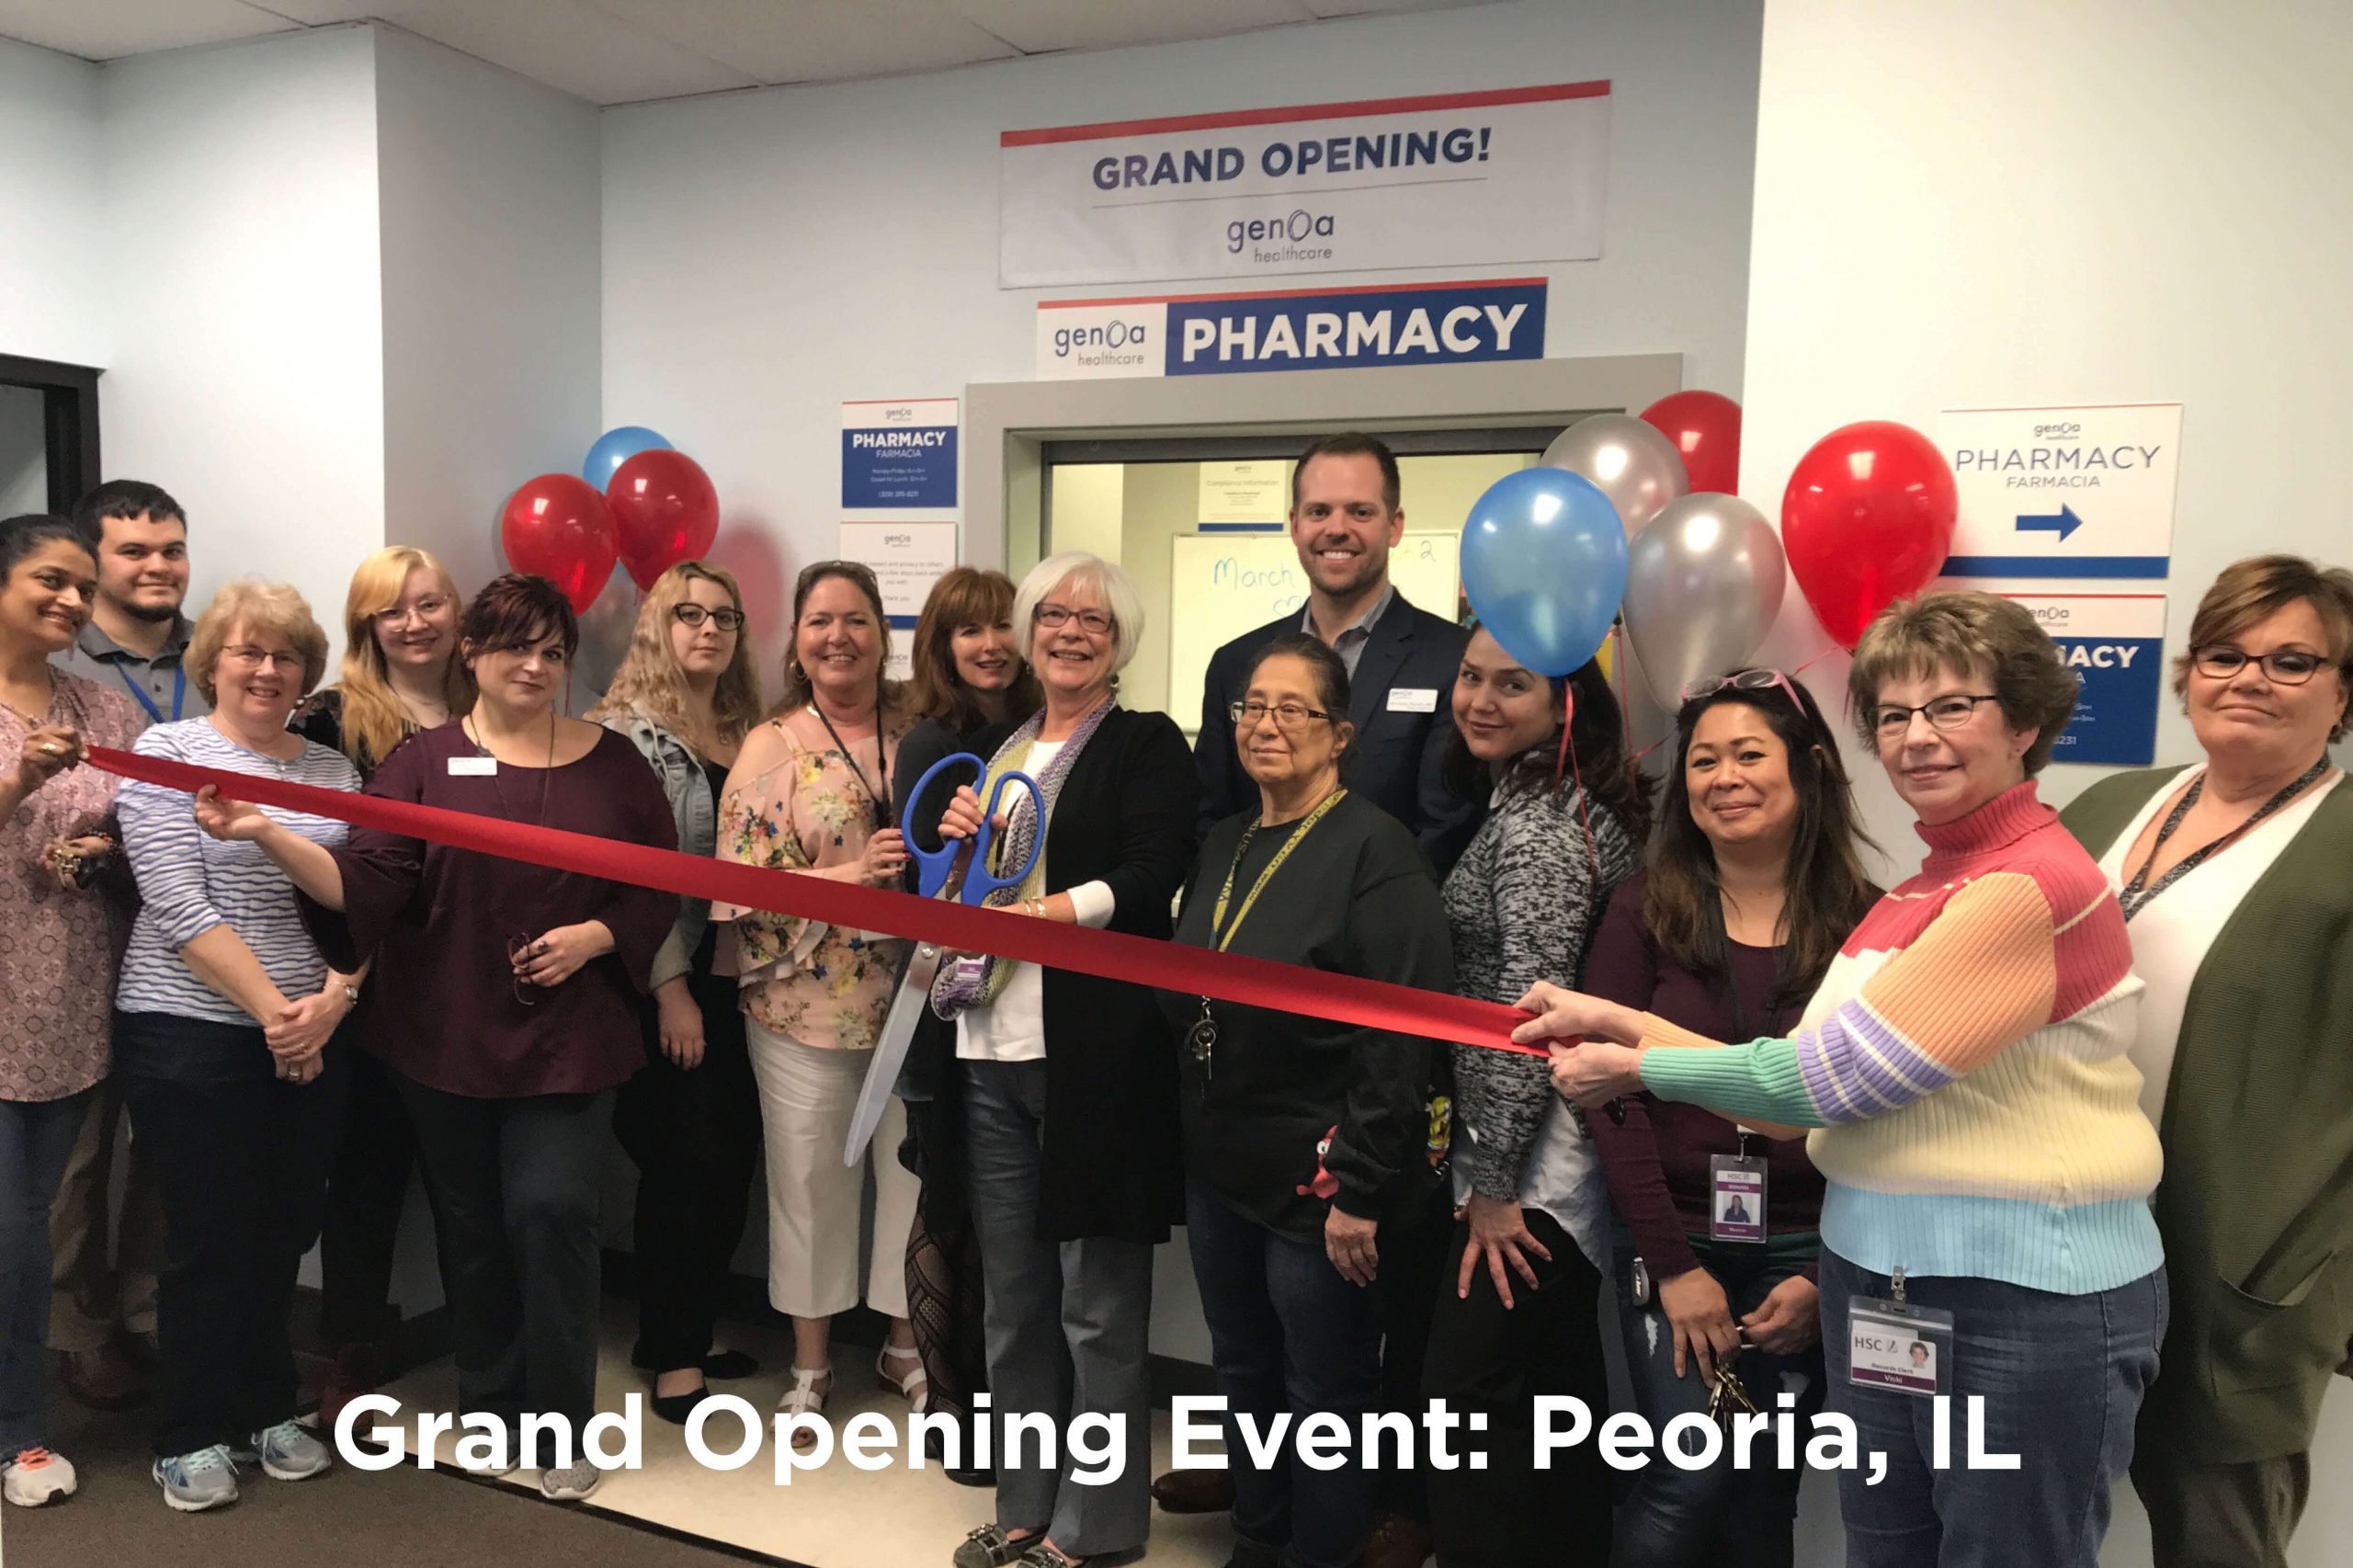 Peoria IL Pharmacy Grand Opening